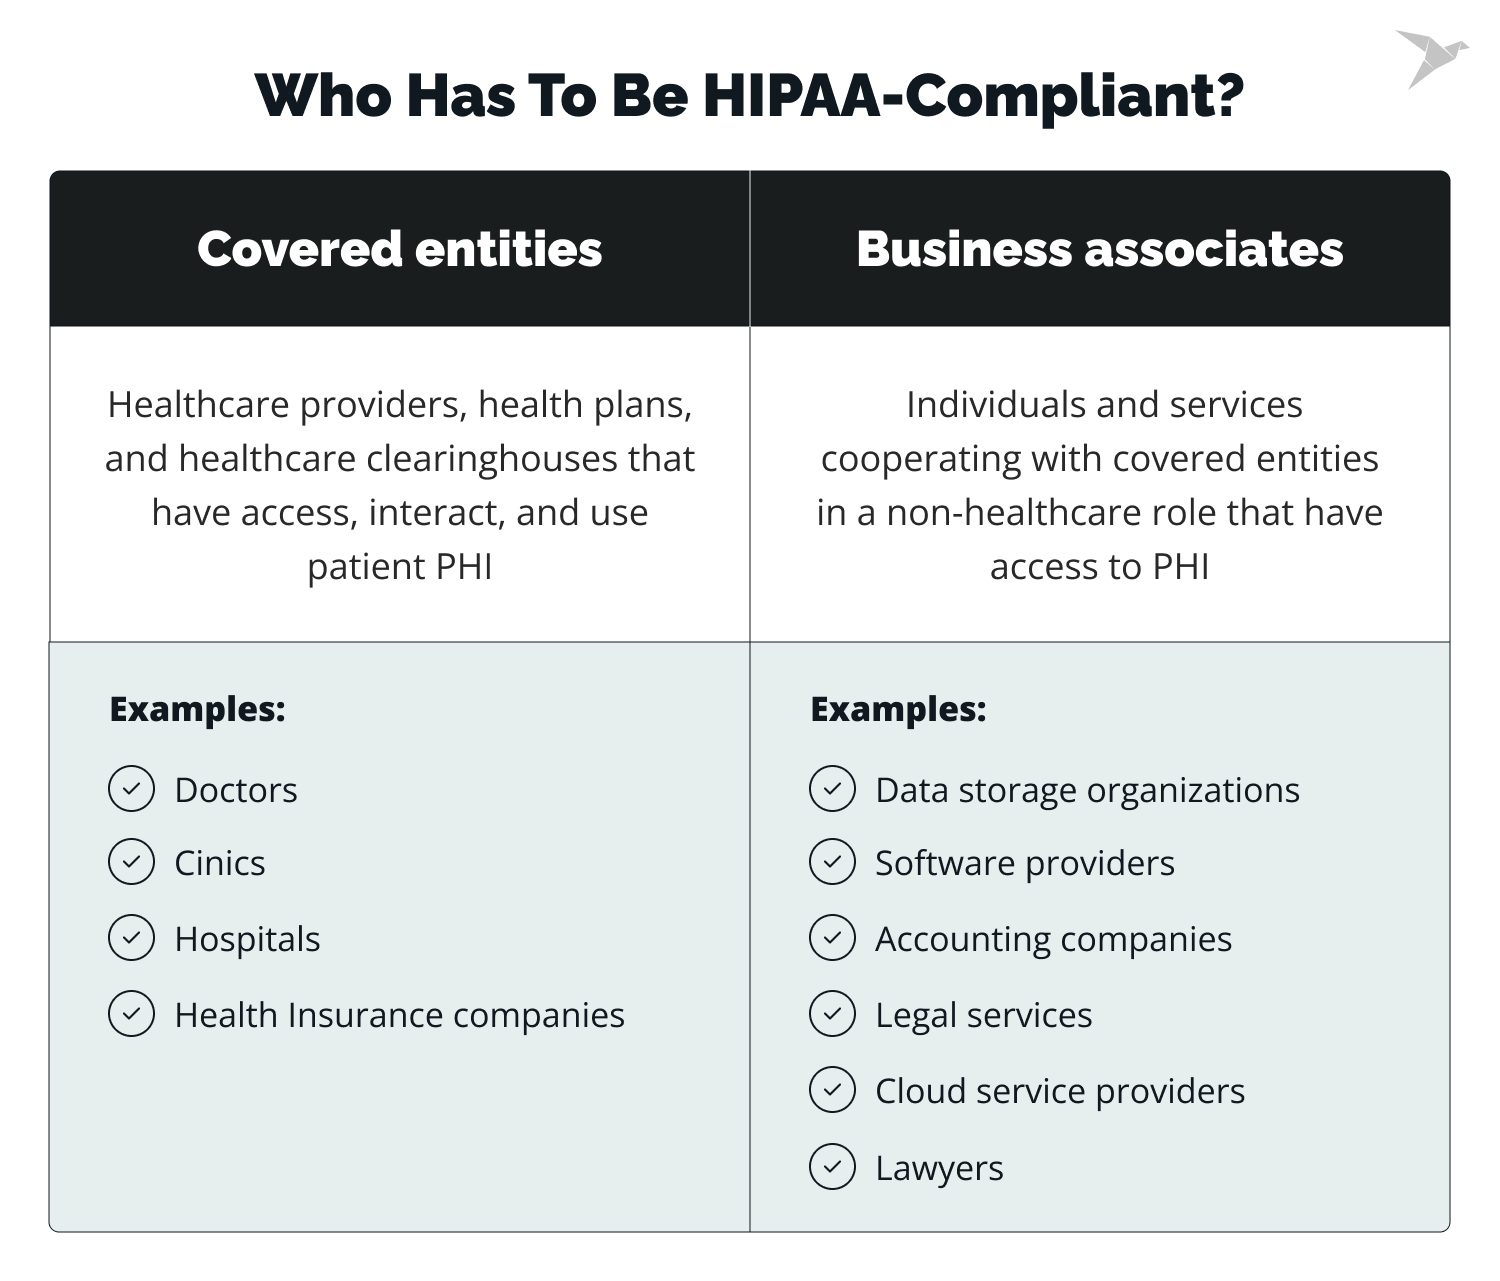 Who has to be HIPAA compliant? Covered entities and business associates 